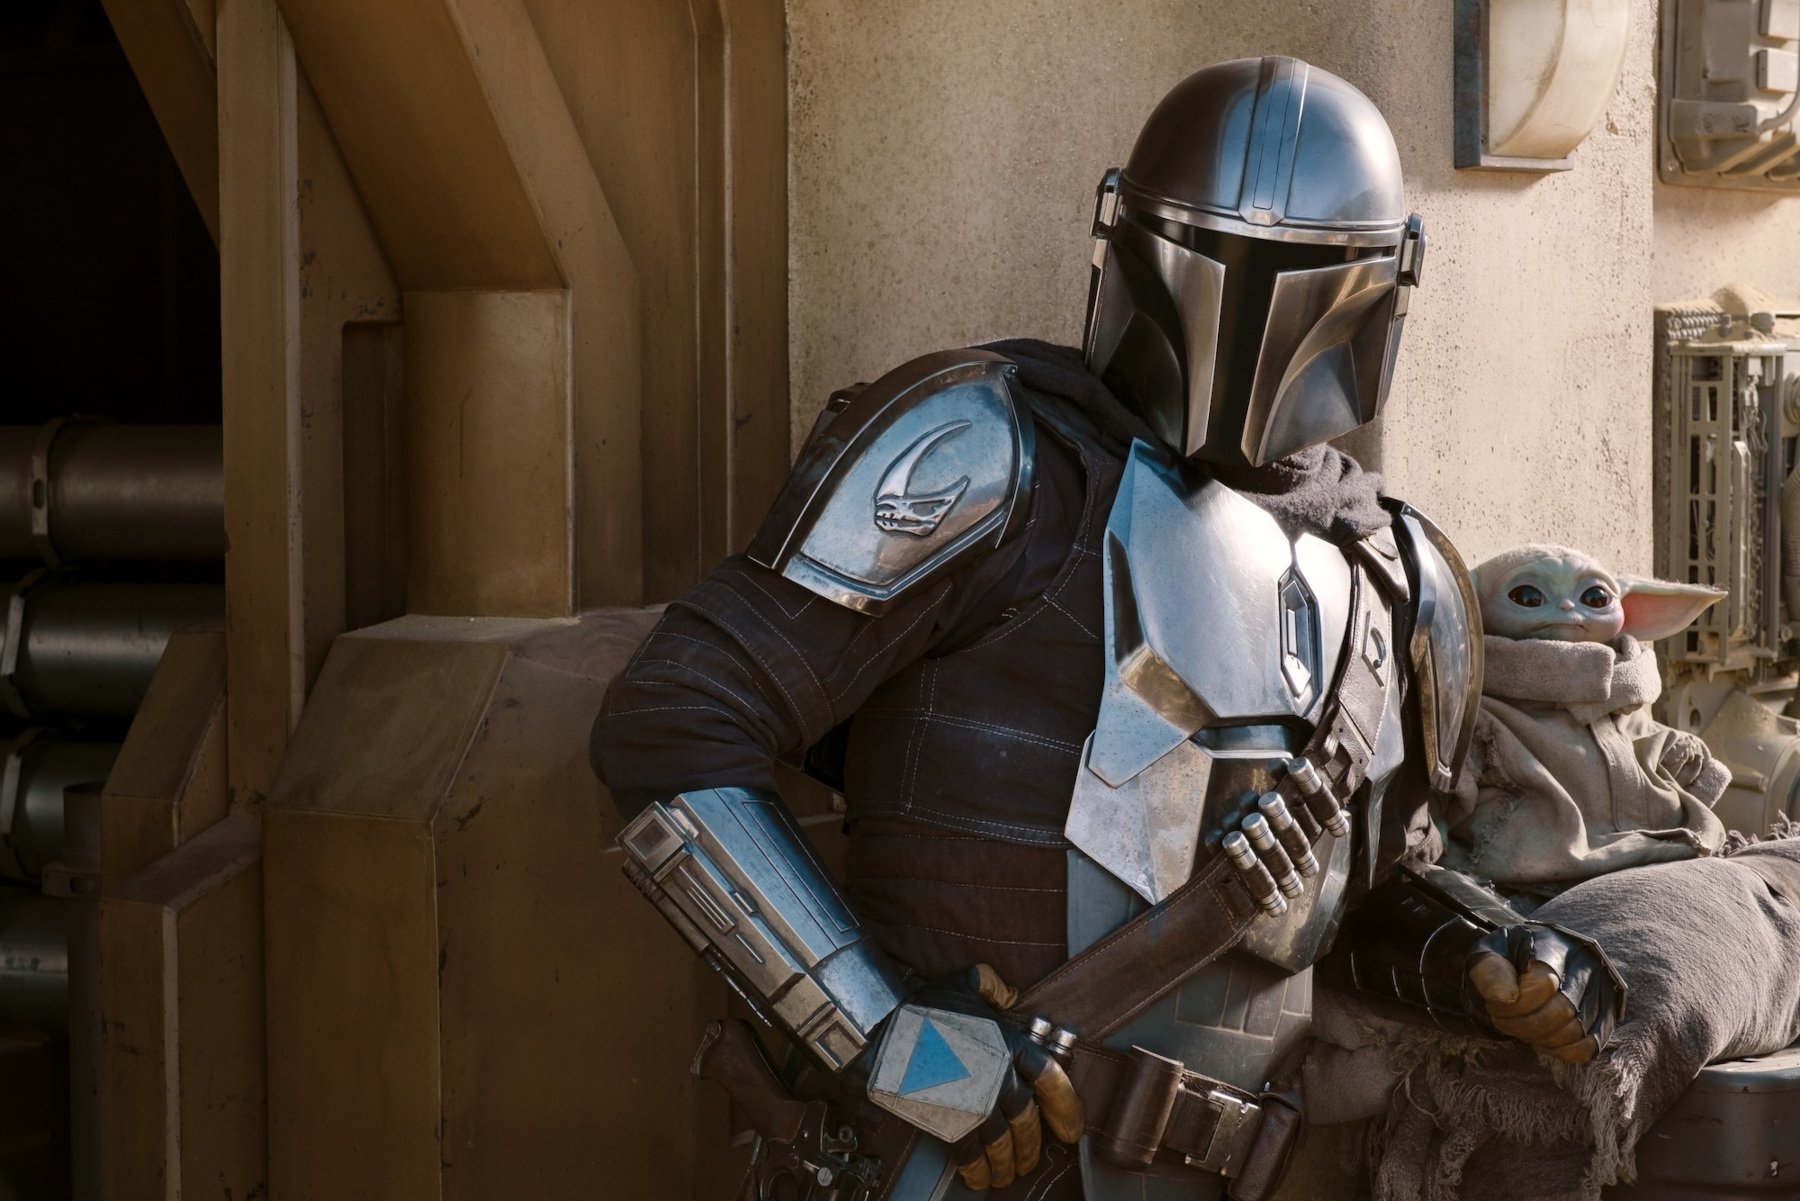 Predo Pascal as Din Djarin in 'The Mandalorian' for our article about the season 3 release date. He's wearing a full body of armor and standing next to Grogu.